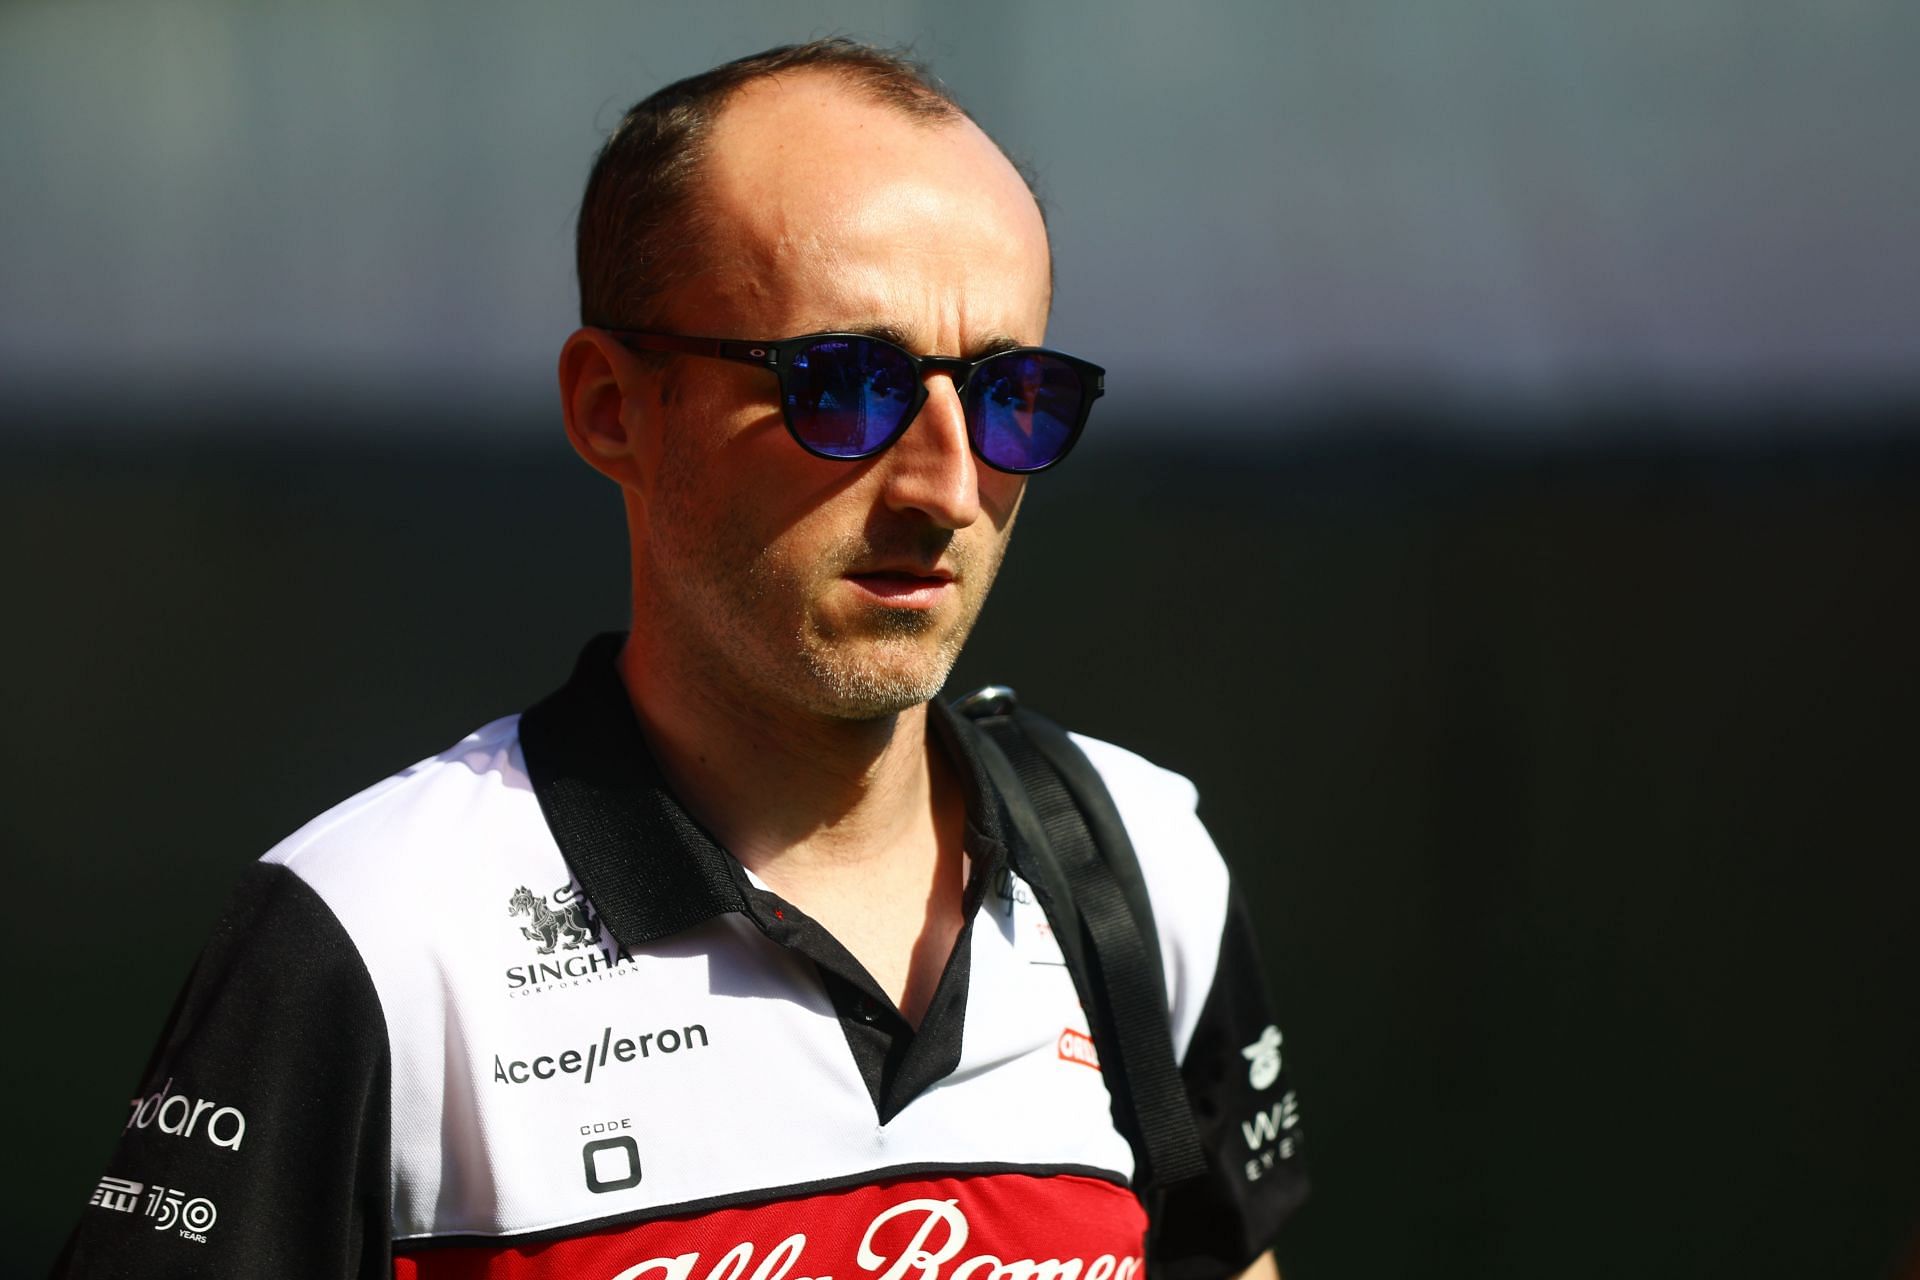 Robert Kubica at the Final Practice session at the 2022 Spanish Grand Prix